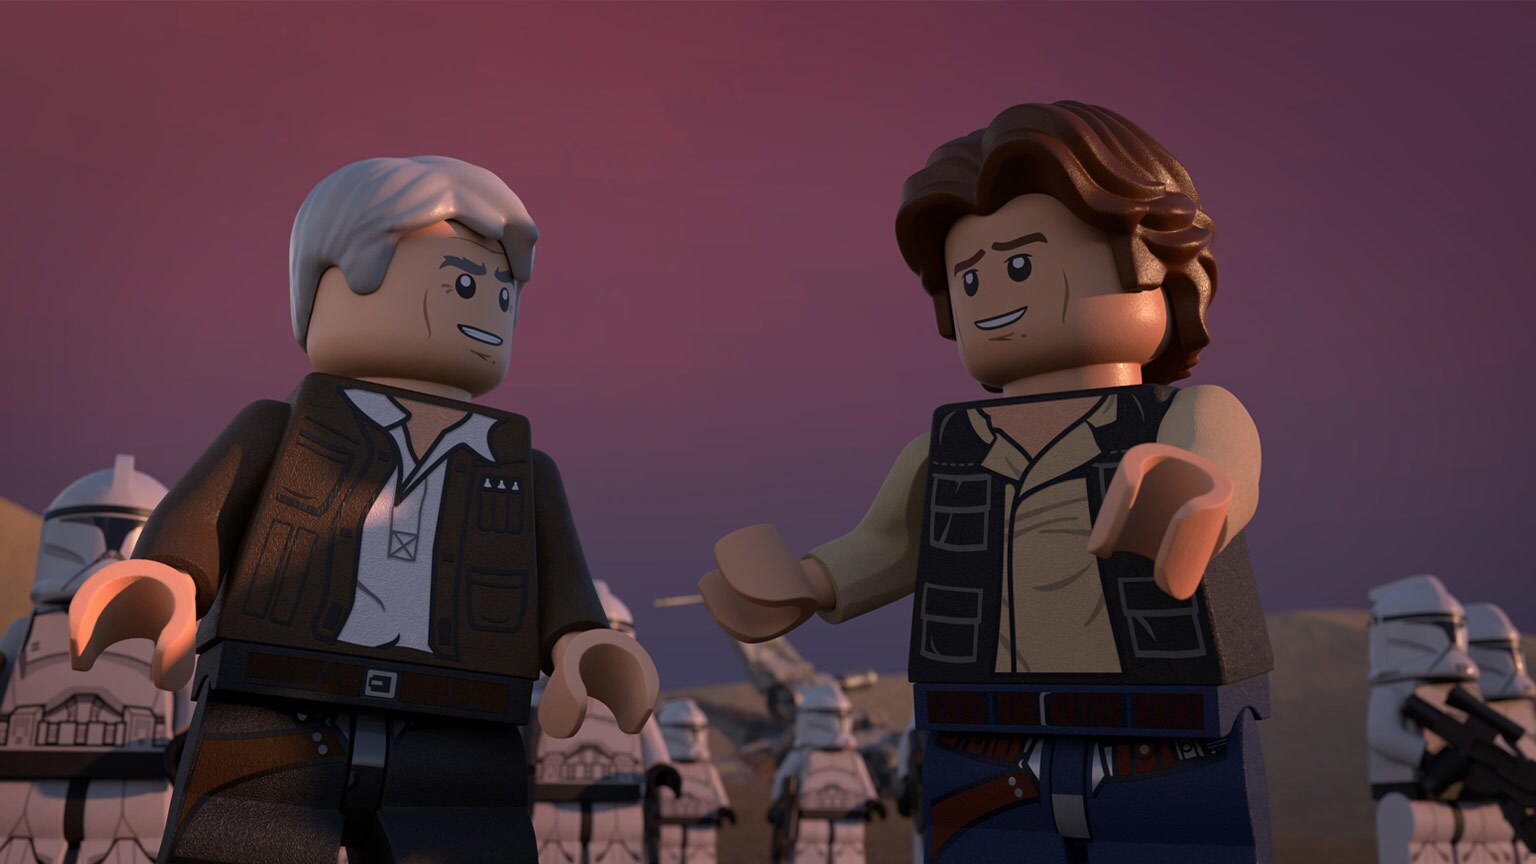 15 Easter Eggs to Find in the LEGO Star Wars Holiday Special